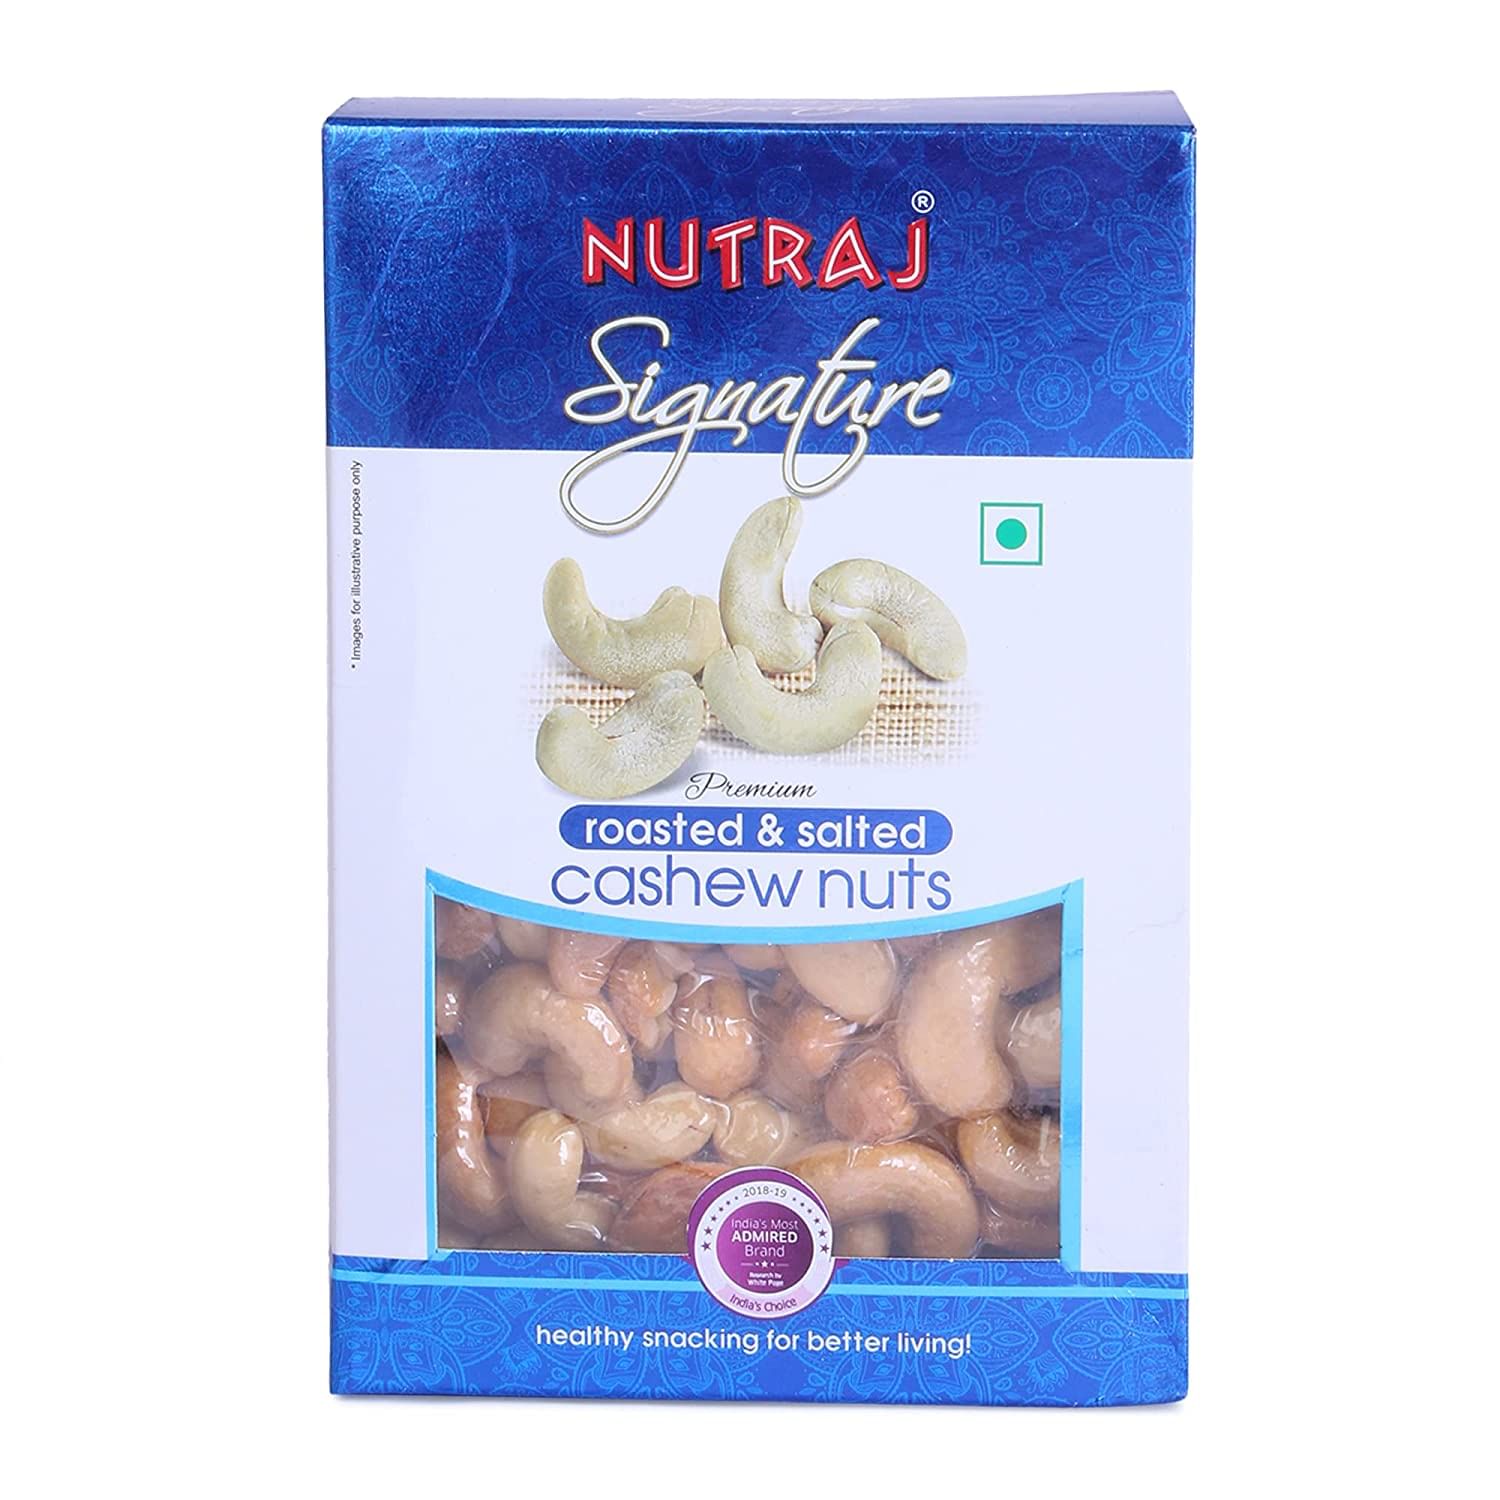 Nutraj Party Combo (Almonds Roasted and Salted 200g, Cashew Roasted and Salted 200g, Spanish Corn Roasted and Salted 150g, Party Mix 150g) - 700g